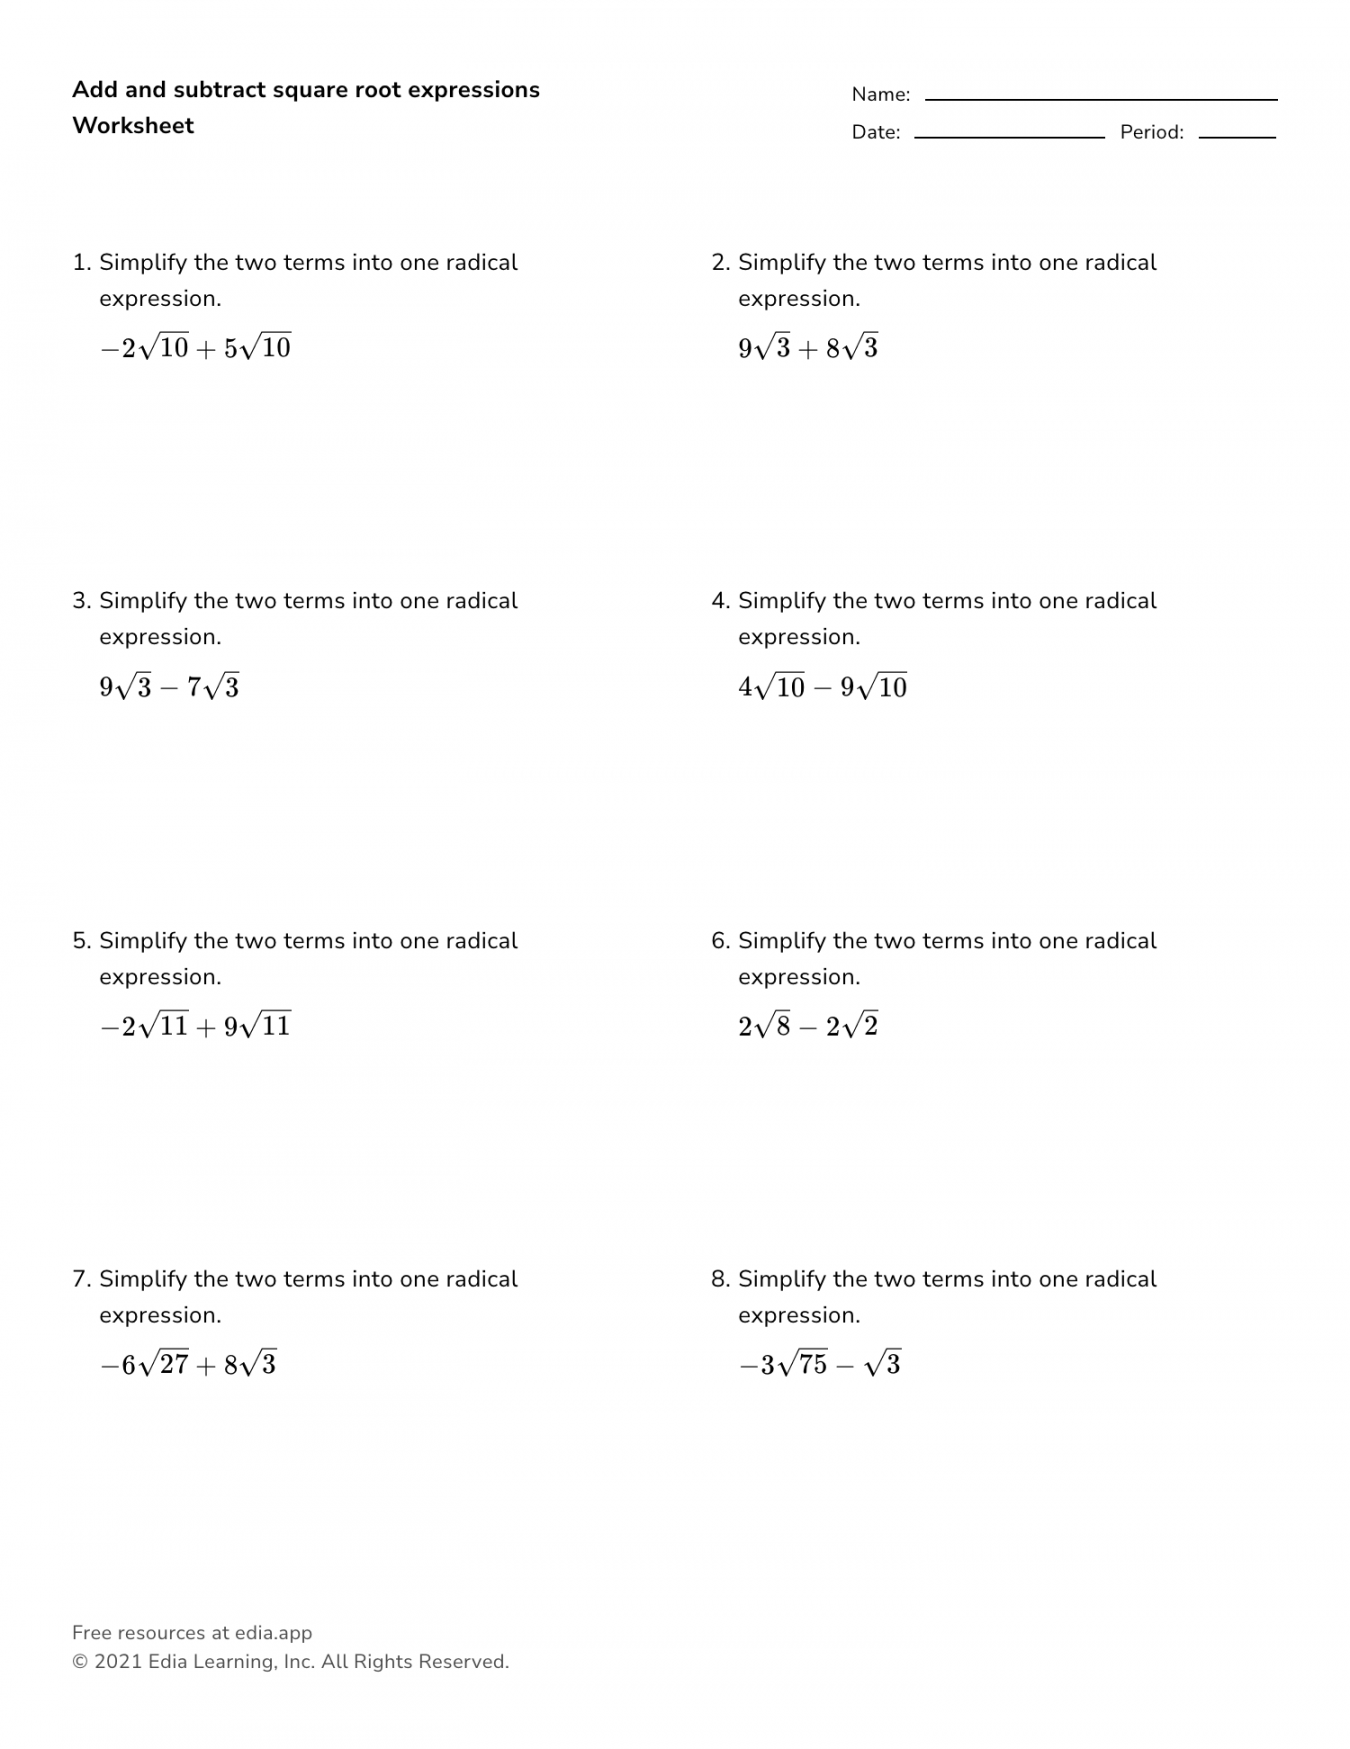 Add And Subtract Square Root Expressions - Worksheet